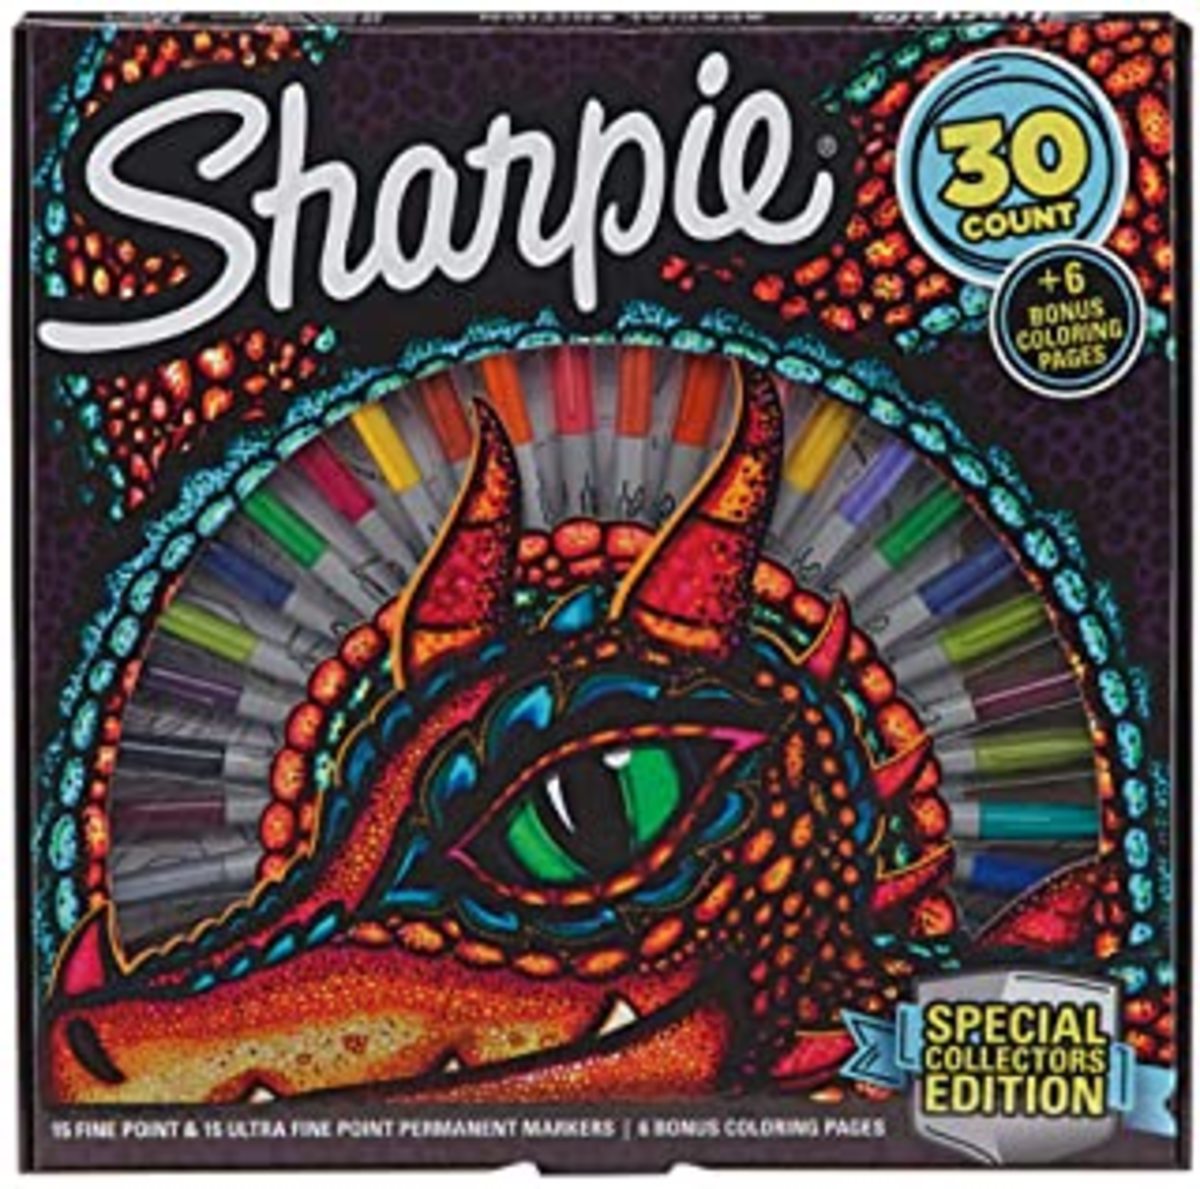 These sharpies are only available for a limited time. They make great gifts.